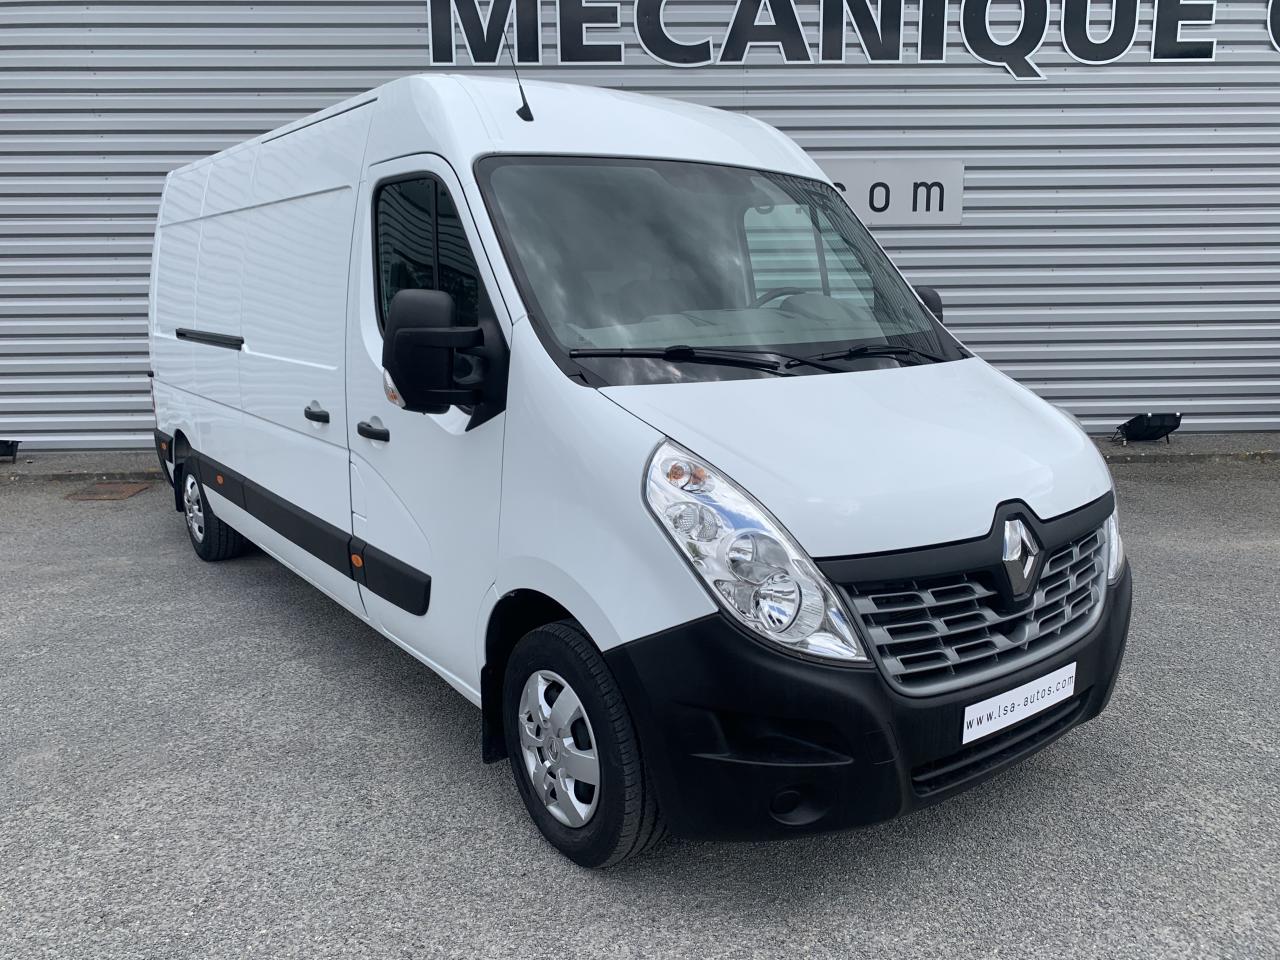 RENAULT Master II Phase 2 L2H2 DIESEL 2.2 L DCi 16V Fourgon 90 CV 156000  KMS 5 PLACES REPRISE - Utilitaires